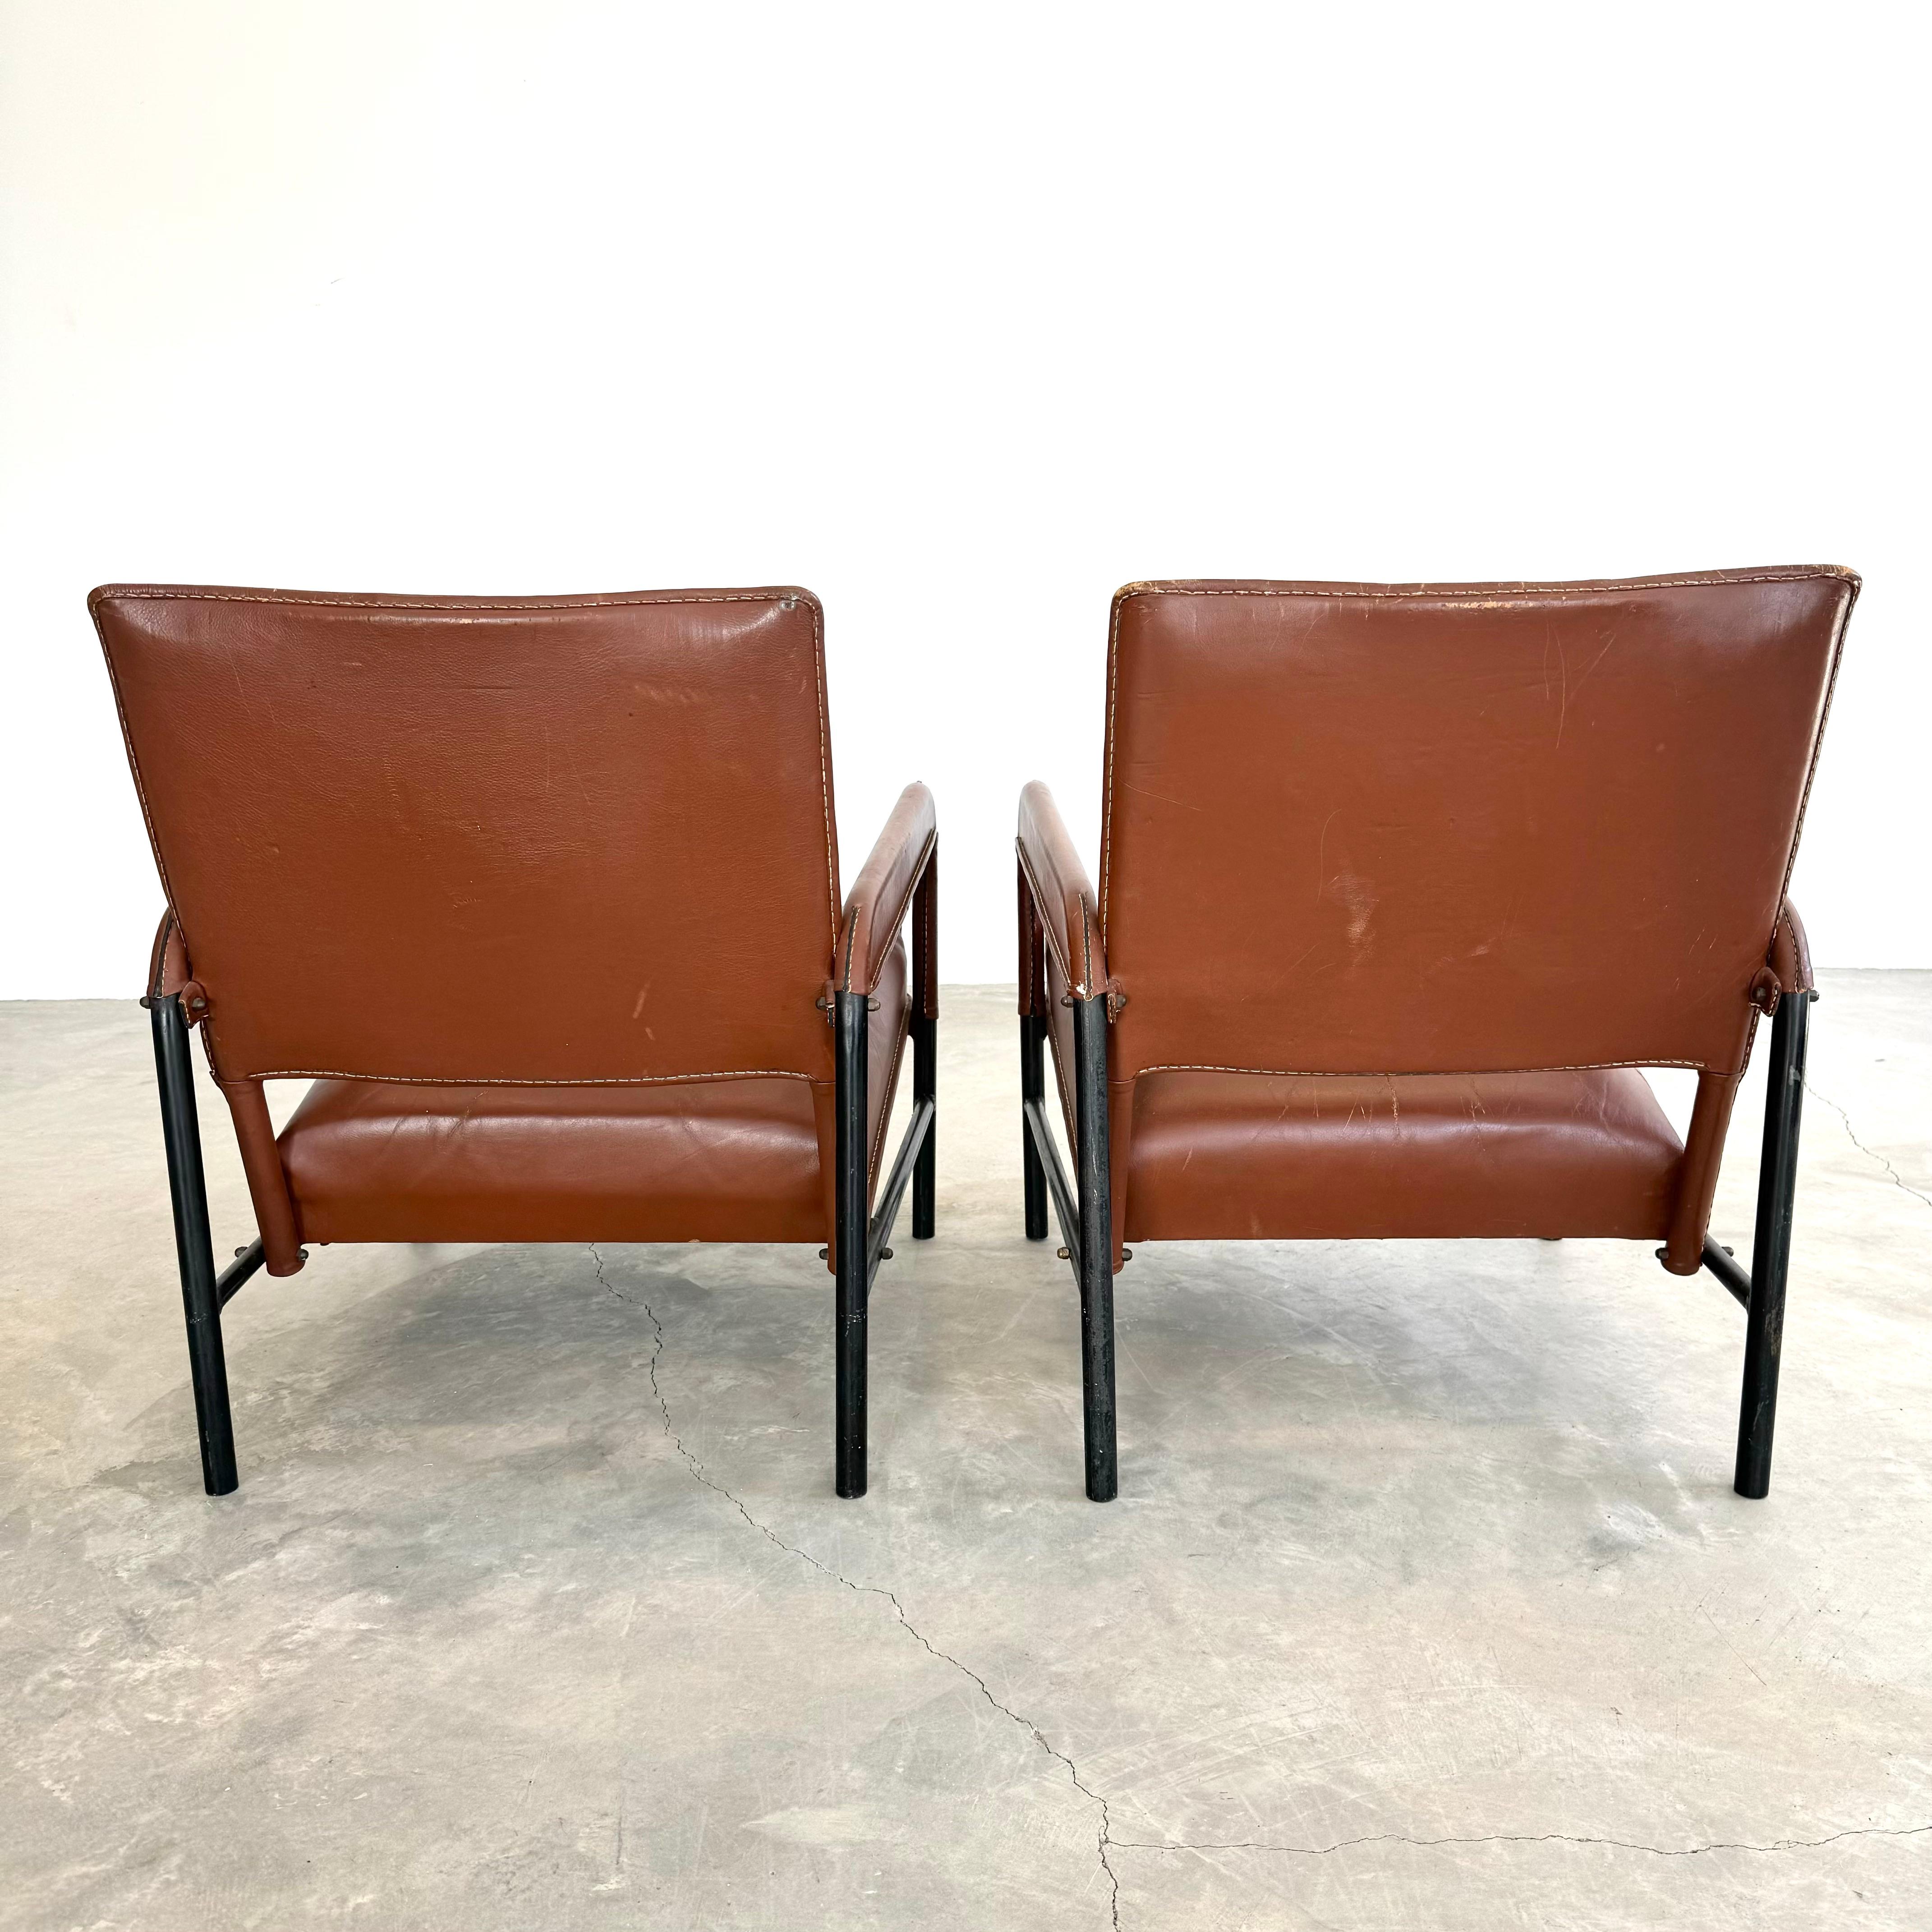 Pair of Saddle Leather and Iron Armchairs by Jacques Adnet, 1950s France For Sale 10